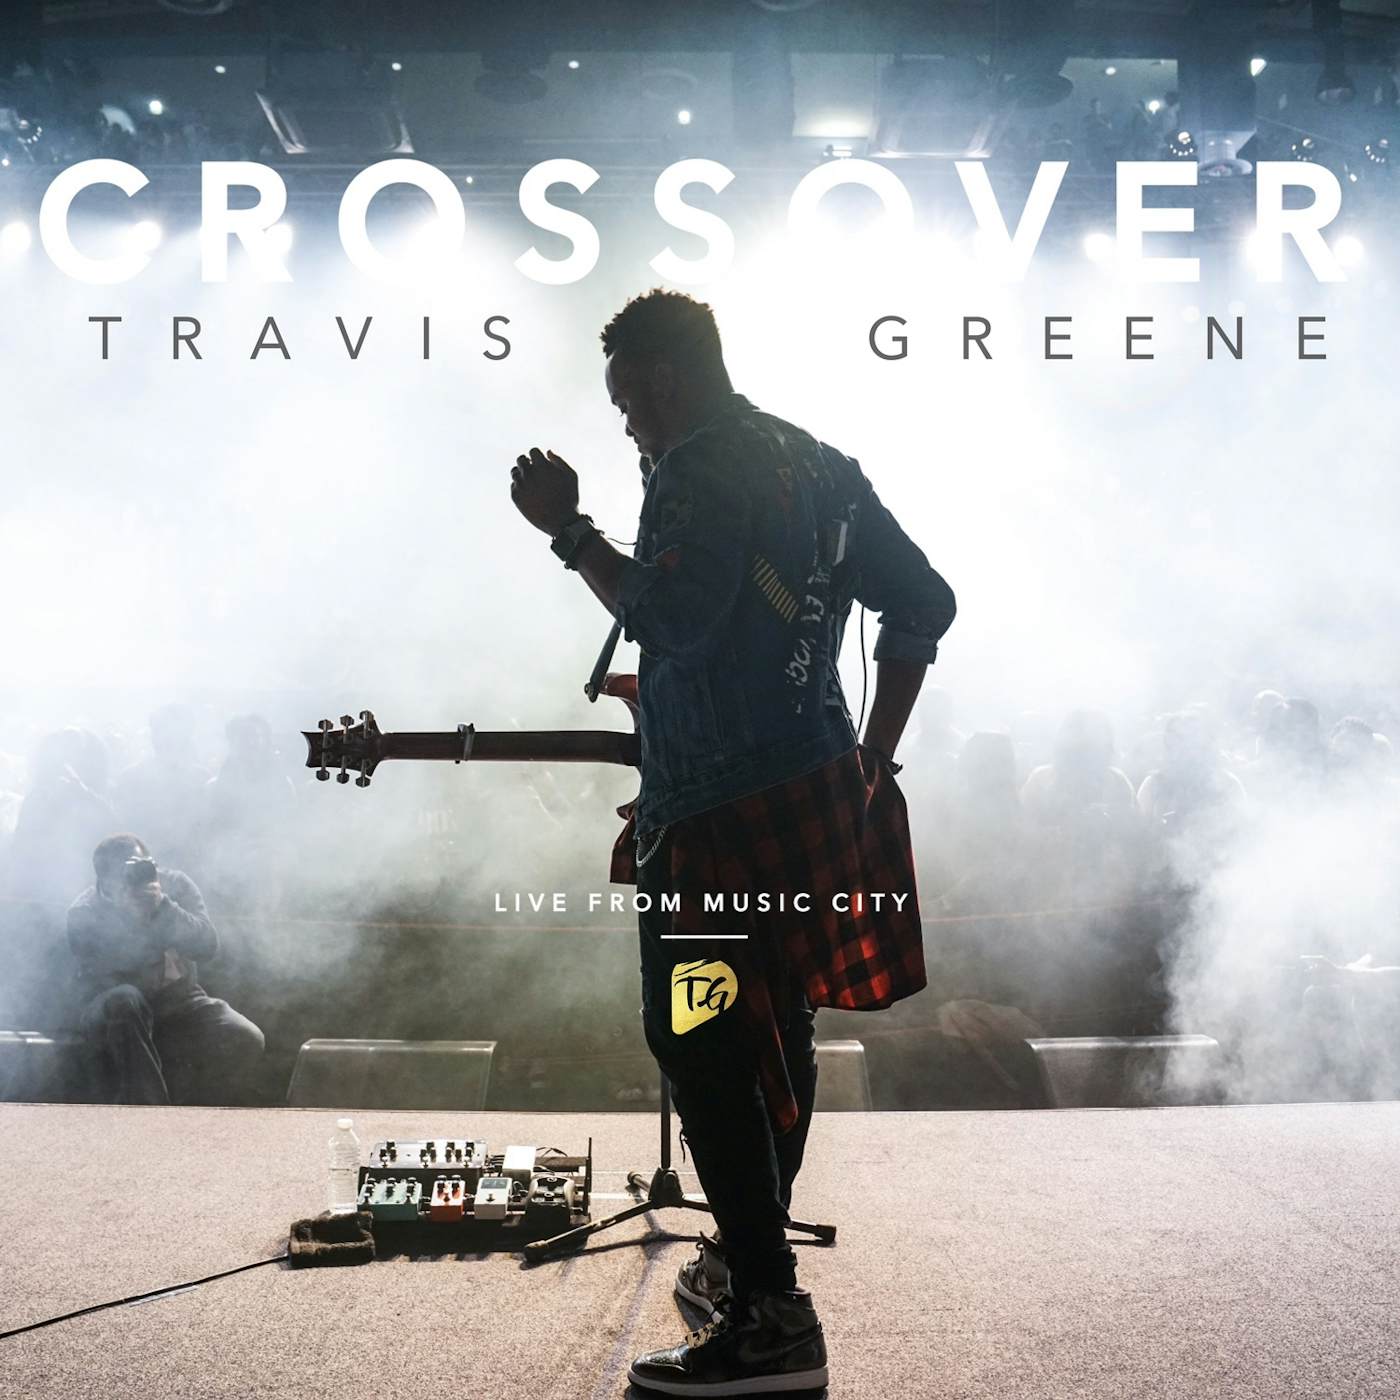 Travis Greene CROSSOVER: LIVE FROM MUSIC CITY CD